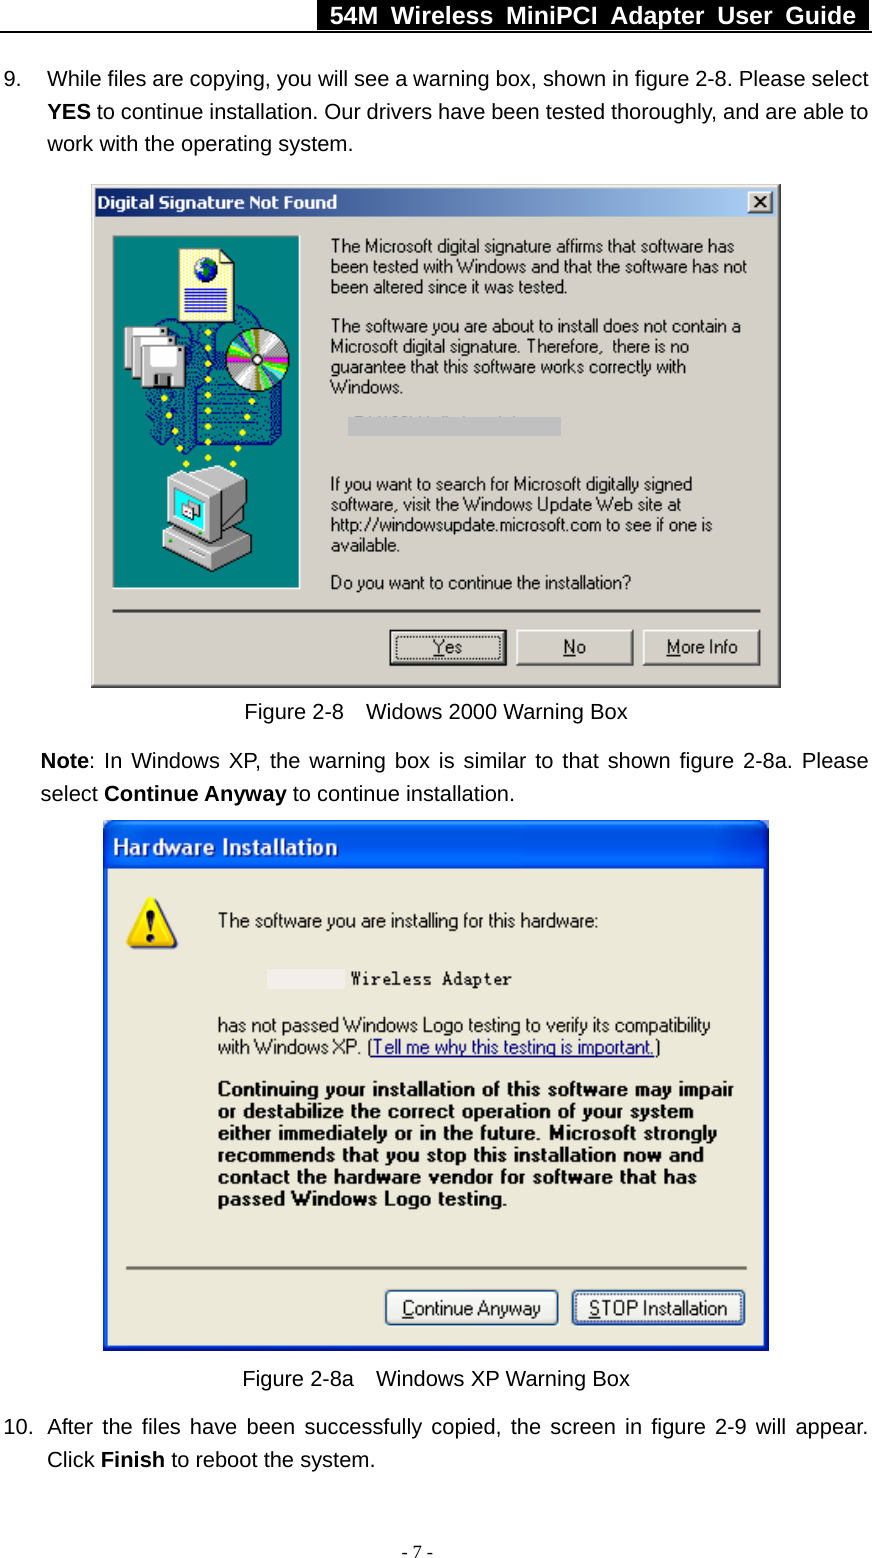   54M Wireless MiniPCI Adapter User Guide  - 7 - 9.  While files are copying, you will see a warning box, shown in figure 2-8. Please select YES to continue installation. Our drivers have been tested thoroughly, and are able to work with the operating system.  Figure 2-8    Widows 2000 Warning Box Note: In Windows XP, the warning box is similar to that shown figure 2-8a. Please select Continue Anyway to continue installation.  Figure 2-8a    Windows XP Warning Box 10.  After the files have been successfully copied, the screen in figure 2-9 will appear. Click Finish to reboot the system. 